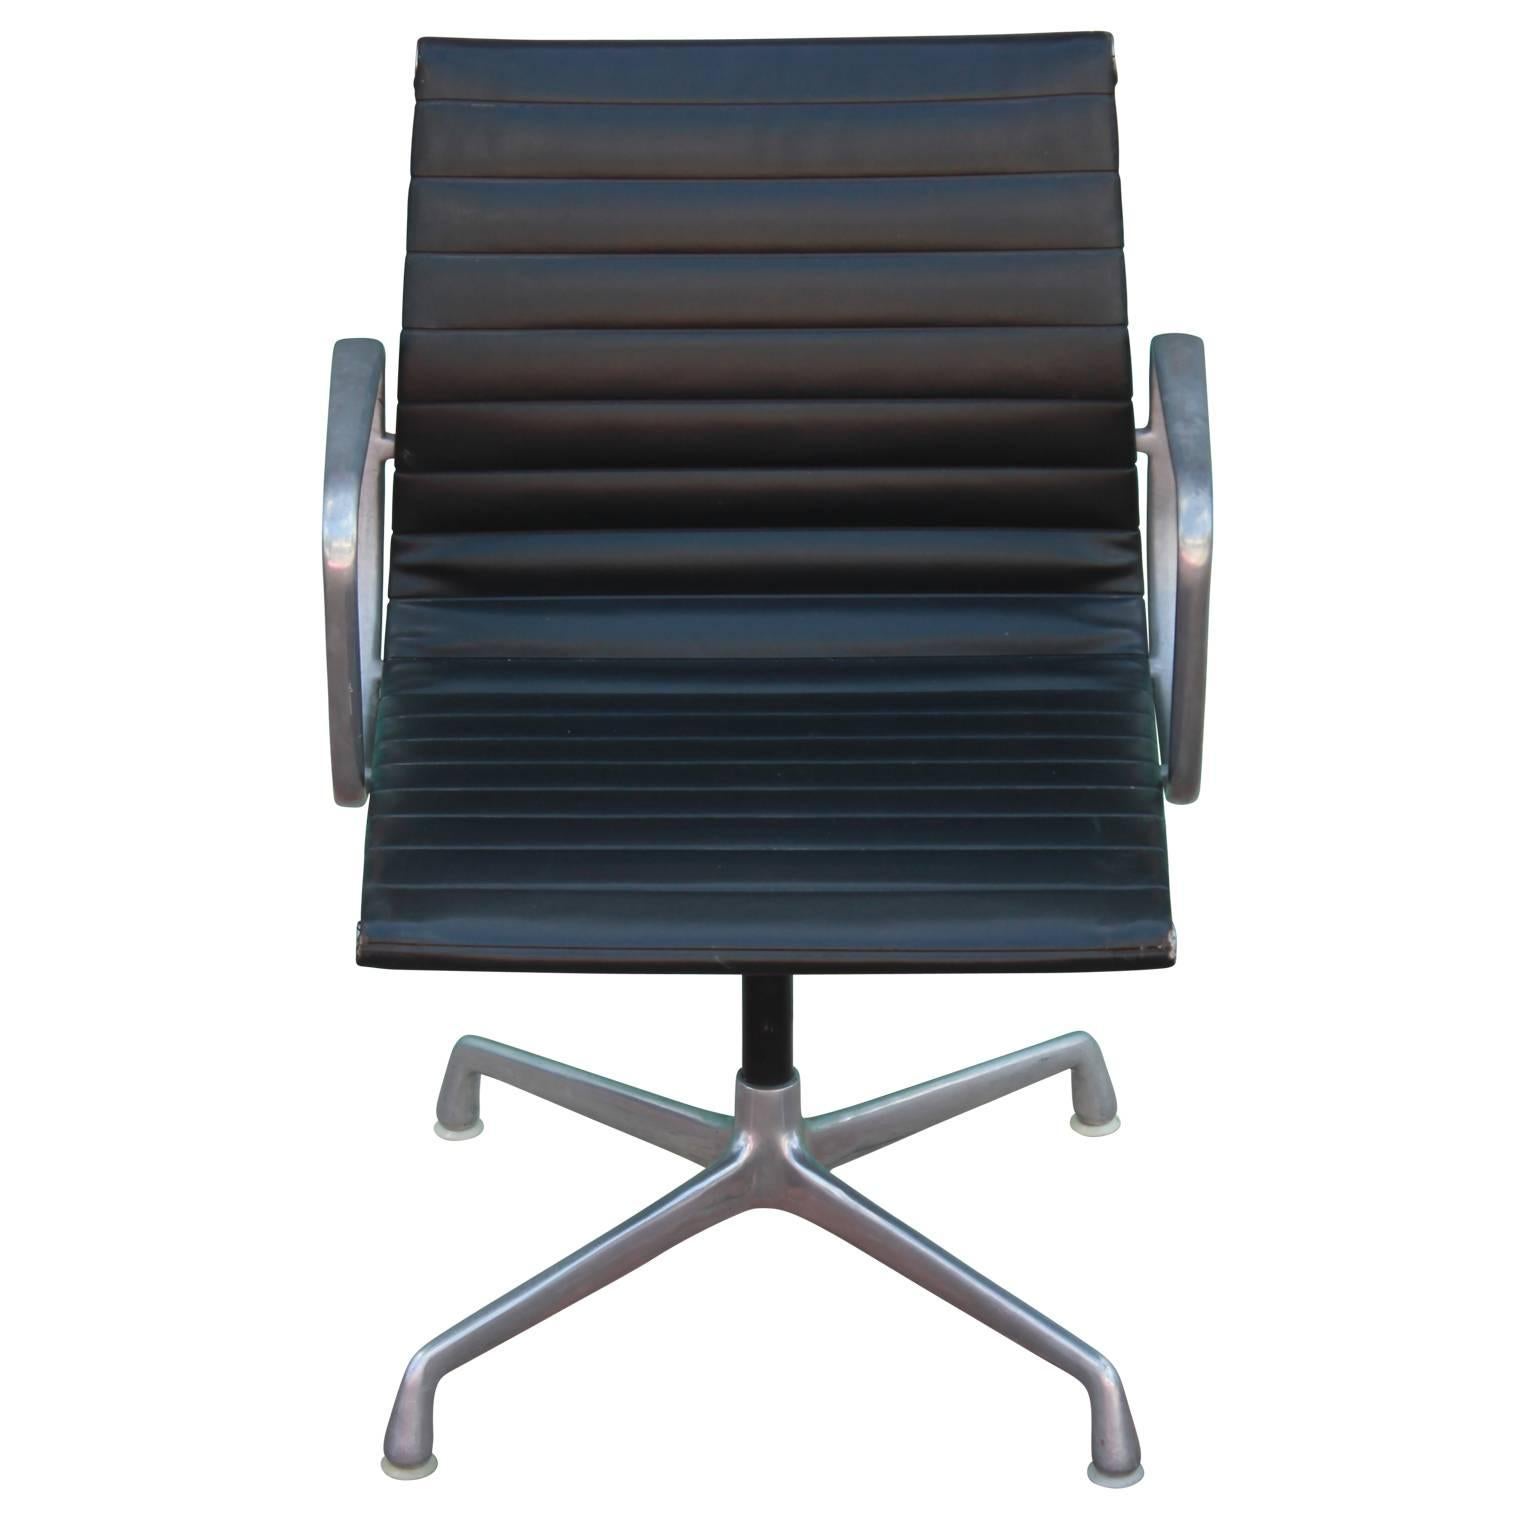 Single Charles Eames for Herman Miller aluminum group office chair. Great armchair for an office or desk.